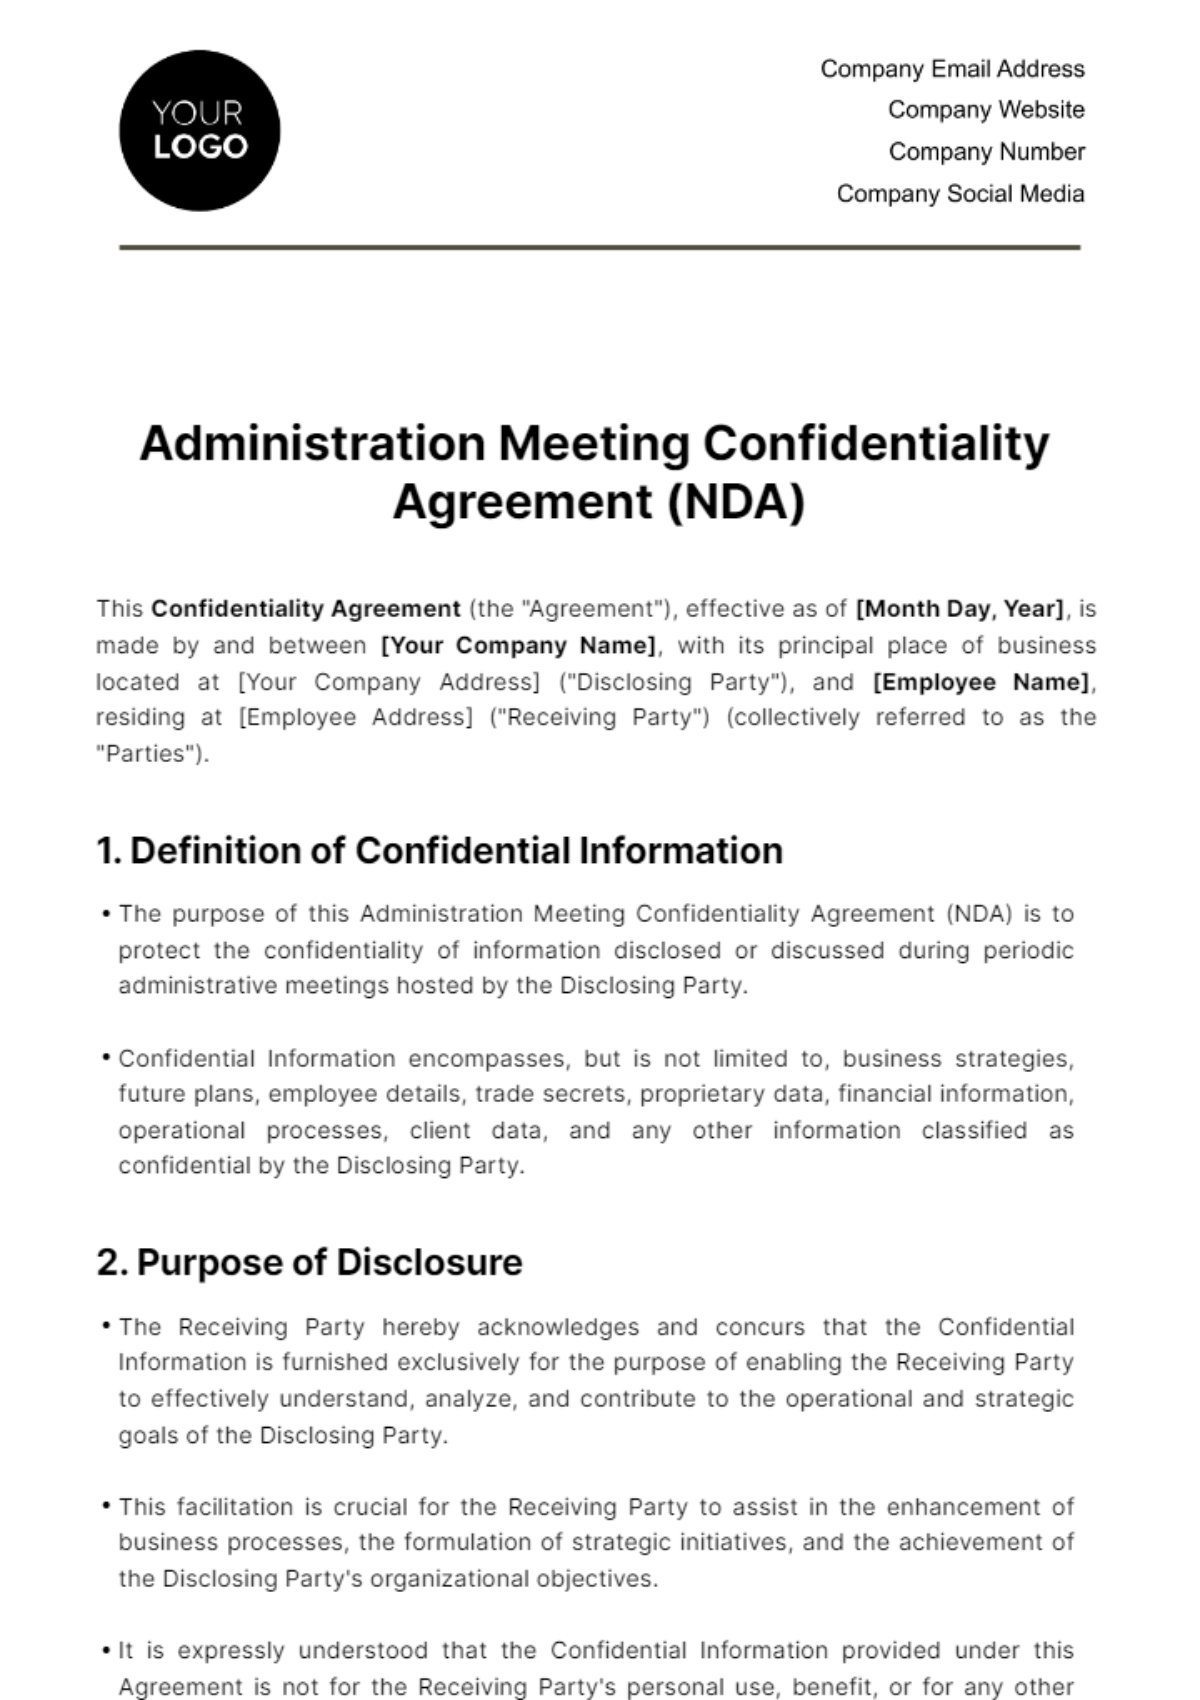 Free Administration Meeting Confidentiality Agreement (NDA) Template